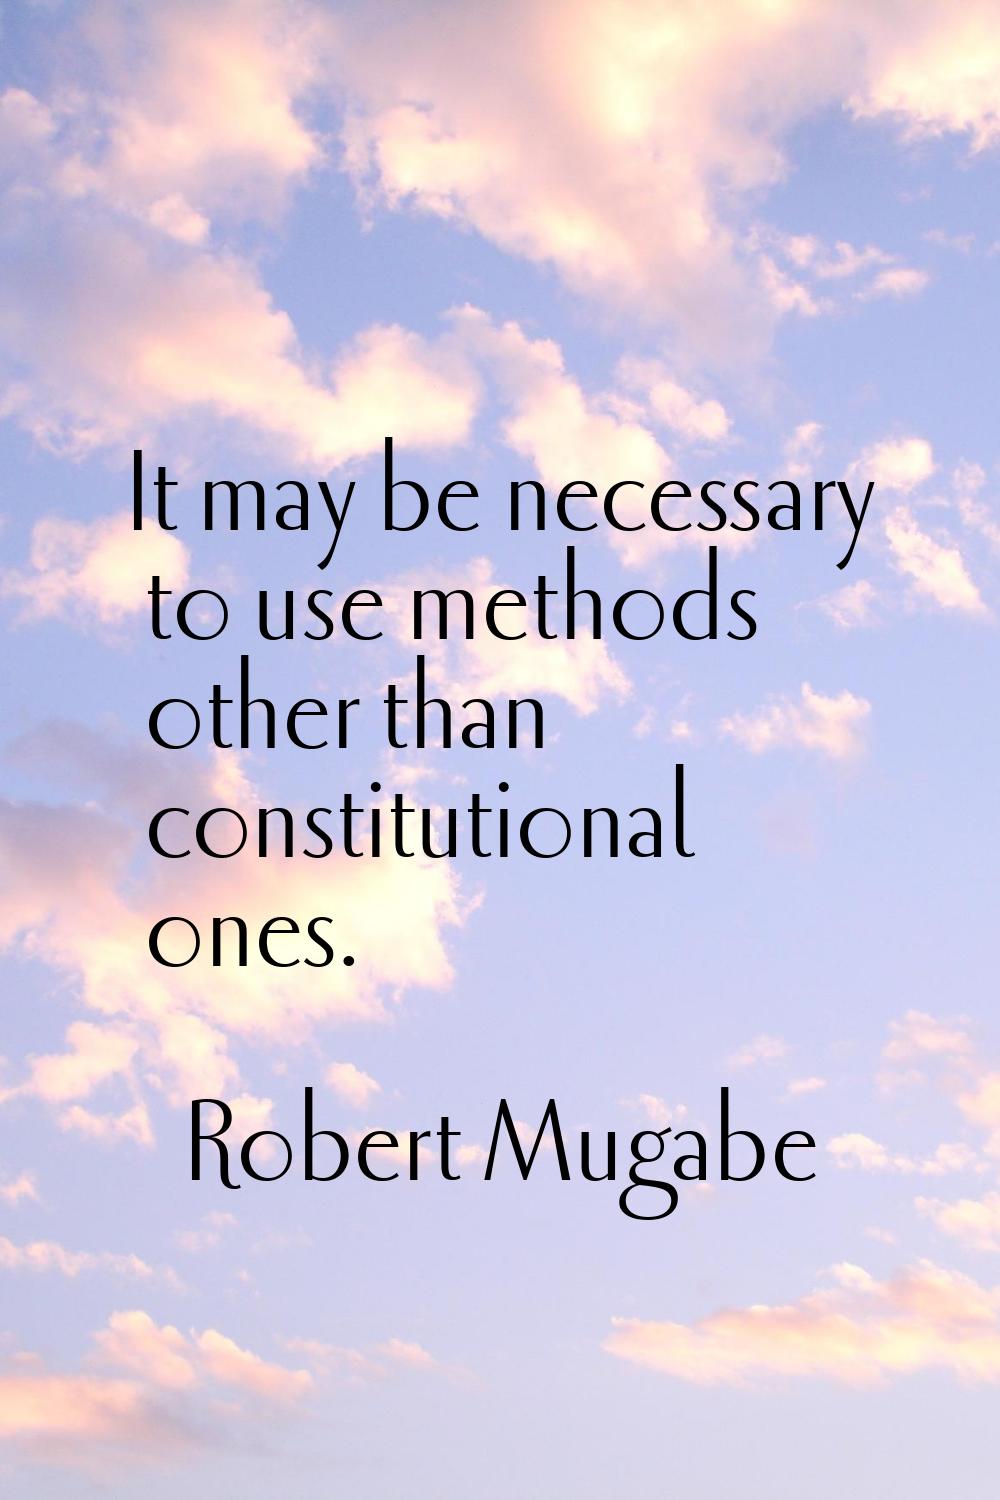 It may be necessary to use methods other than constitutional ones.